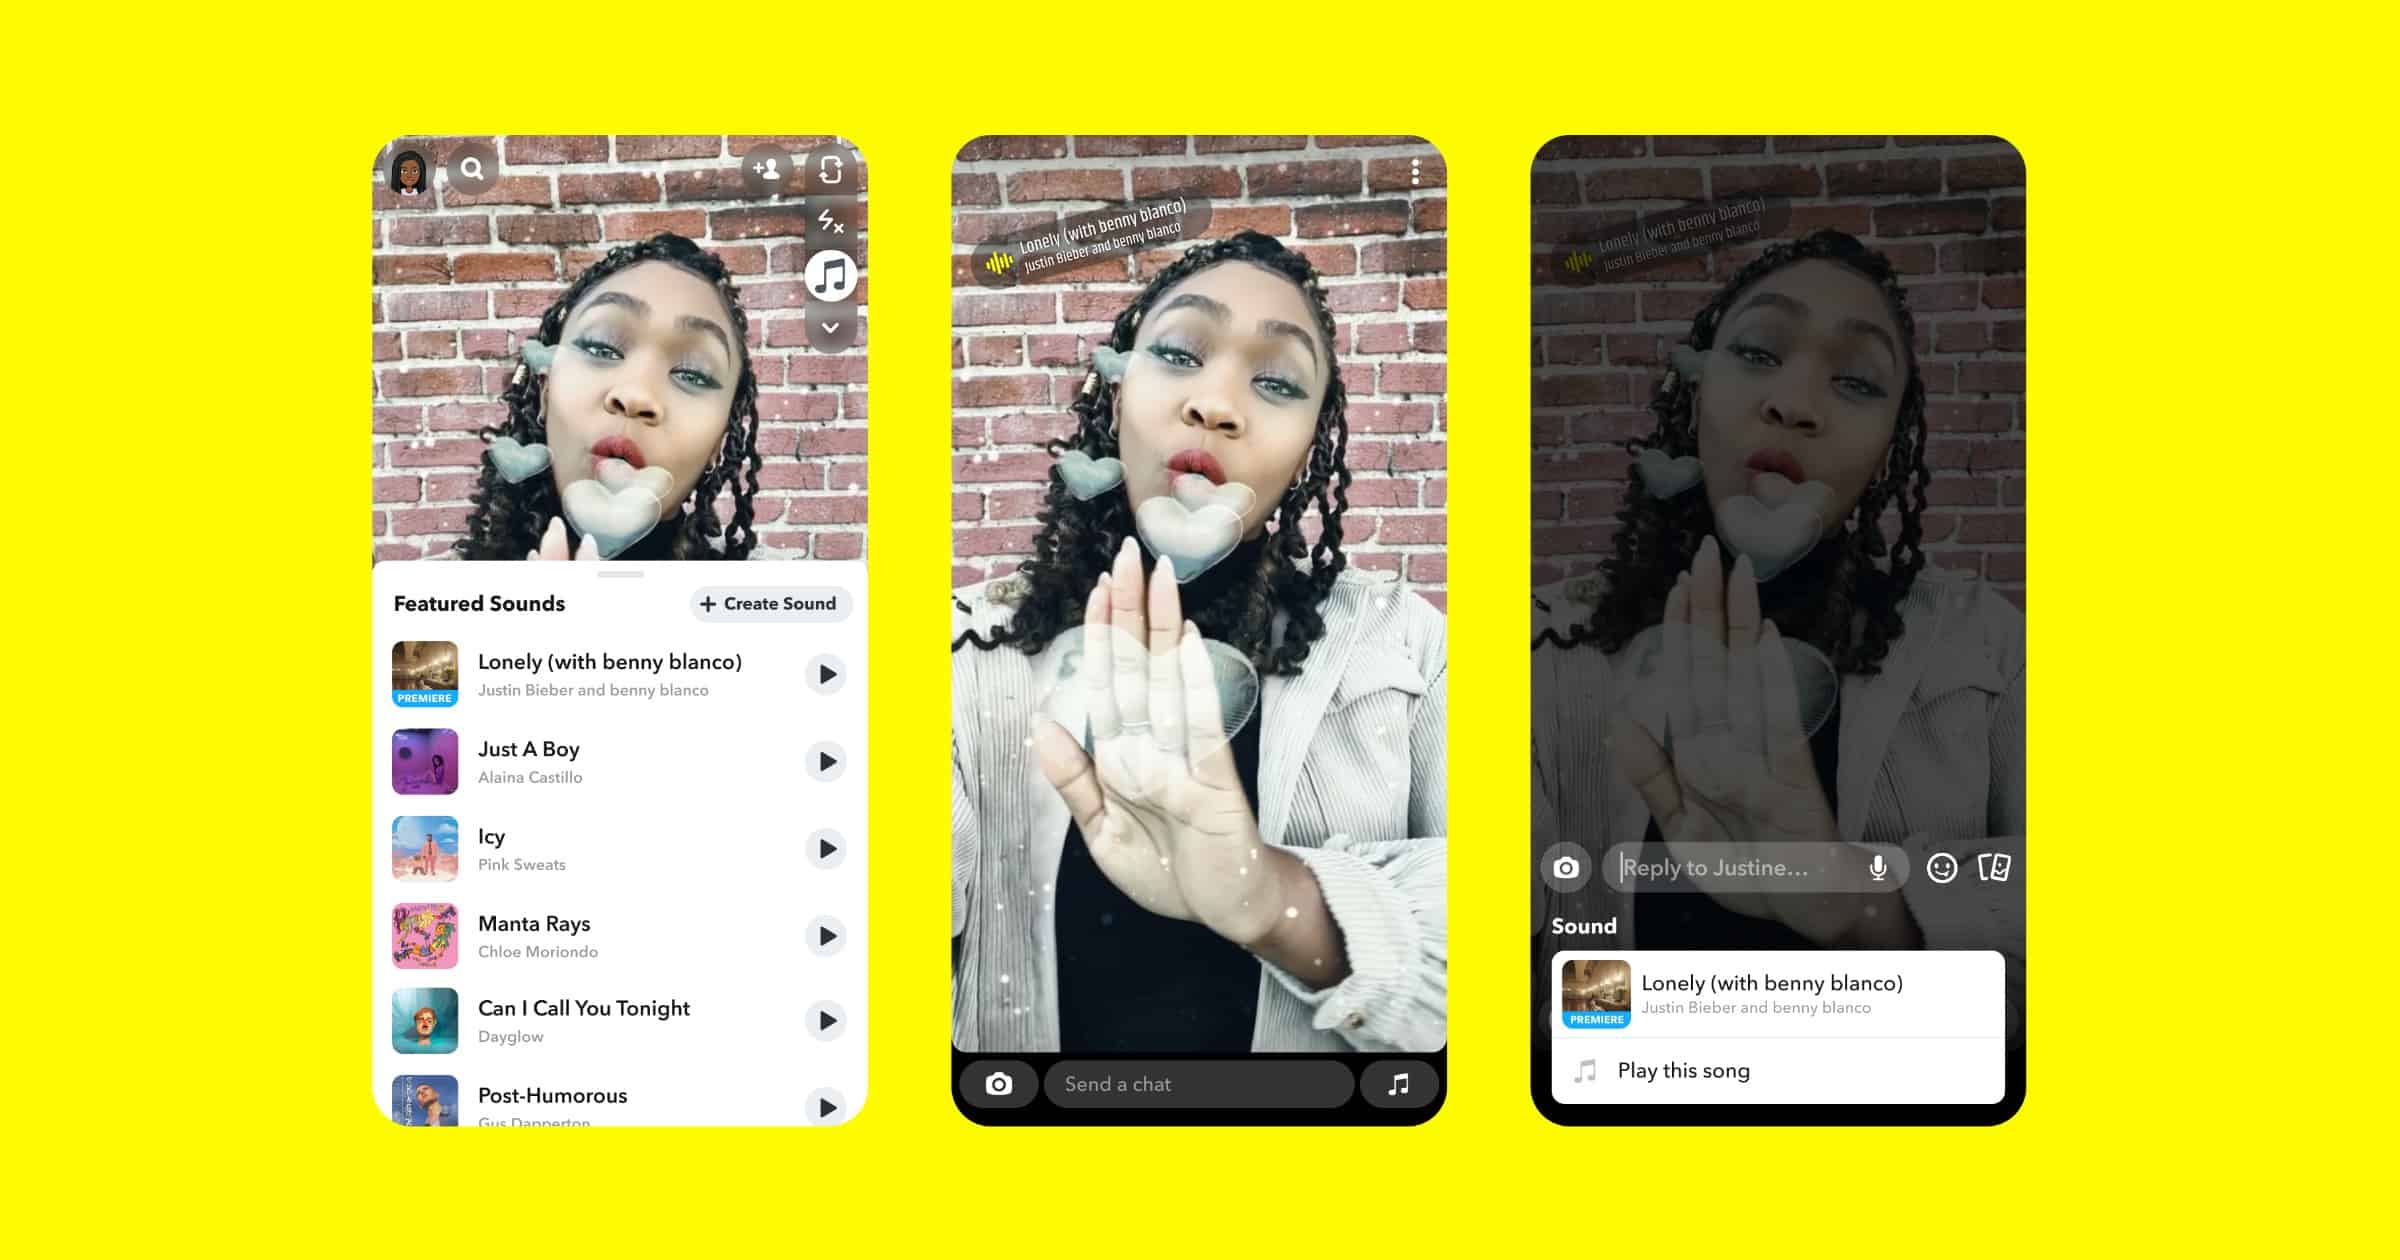 Snapchat Competes With TikTok and Launches ‘Sounds’